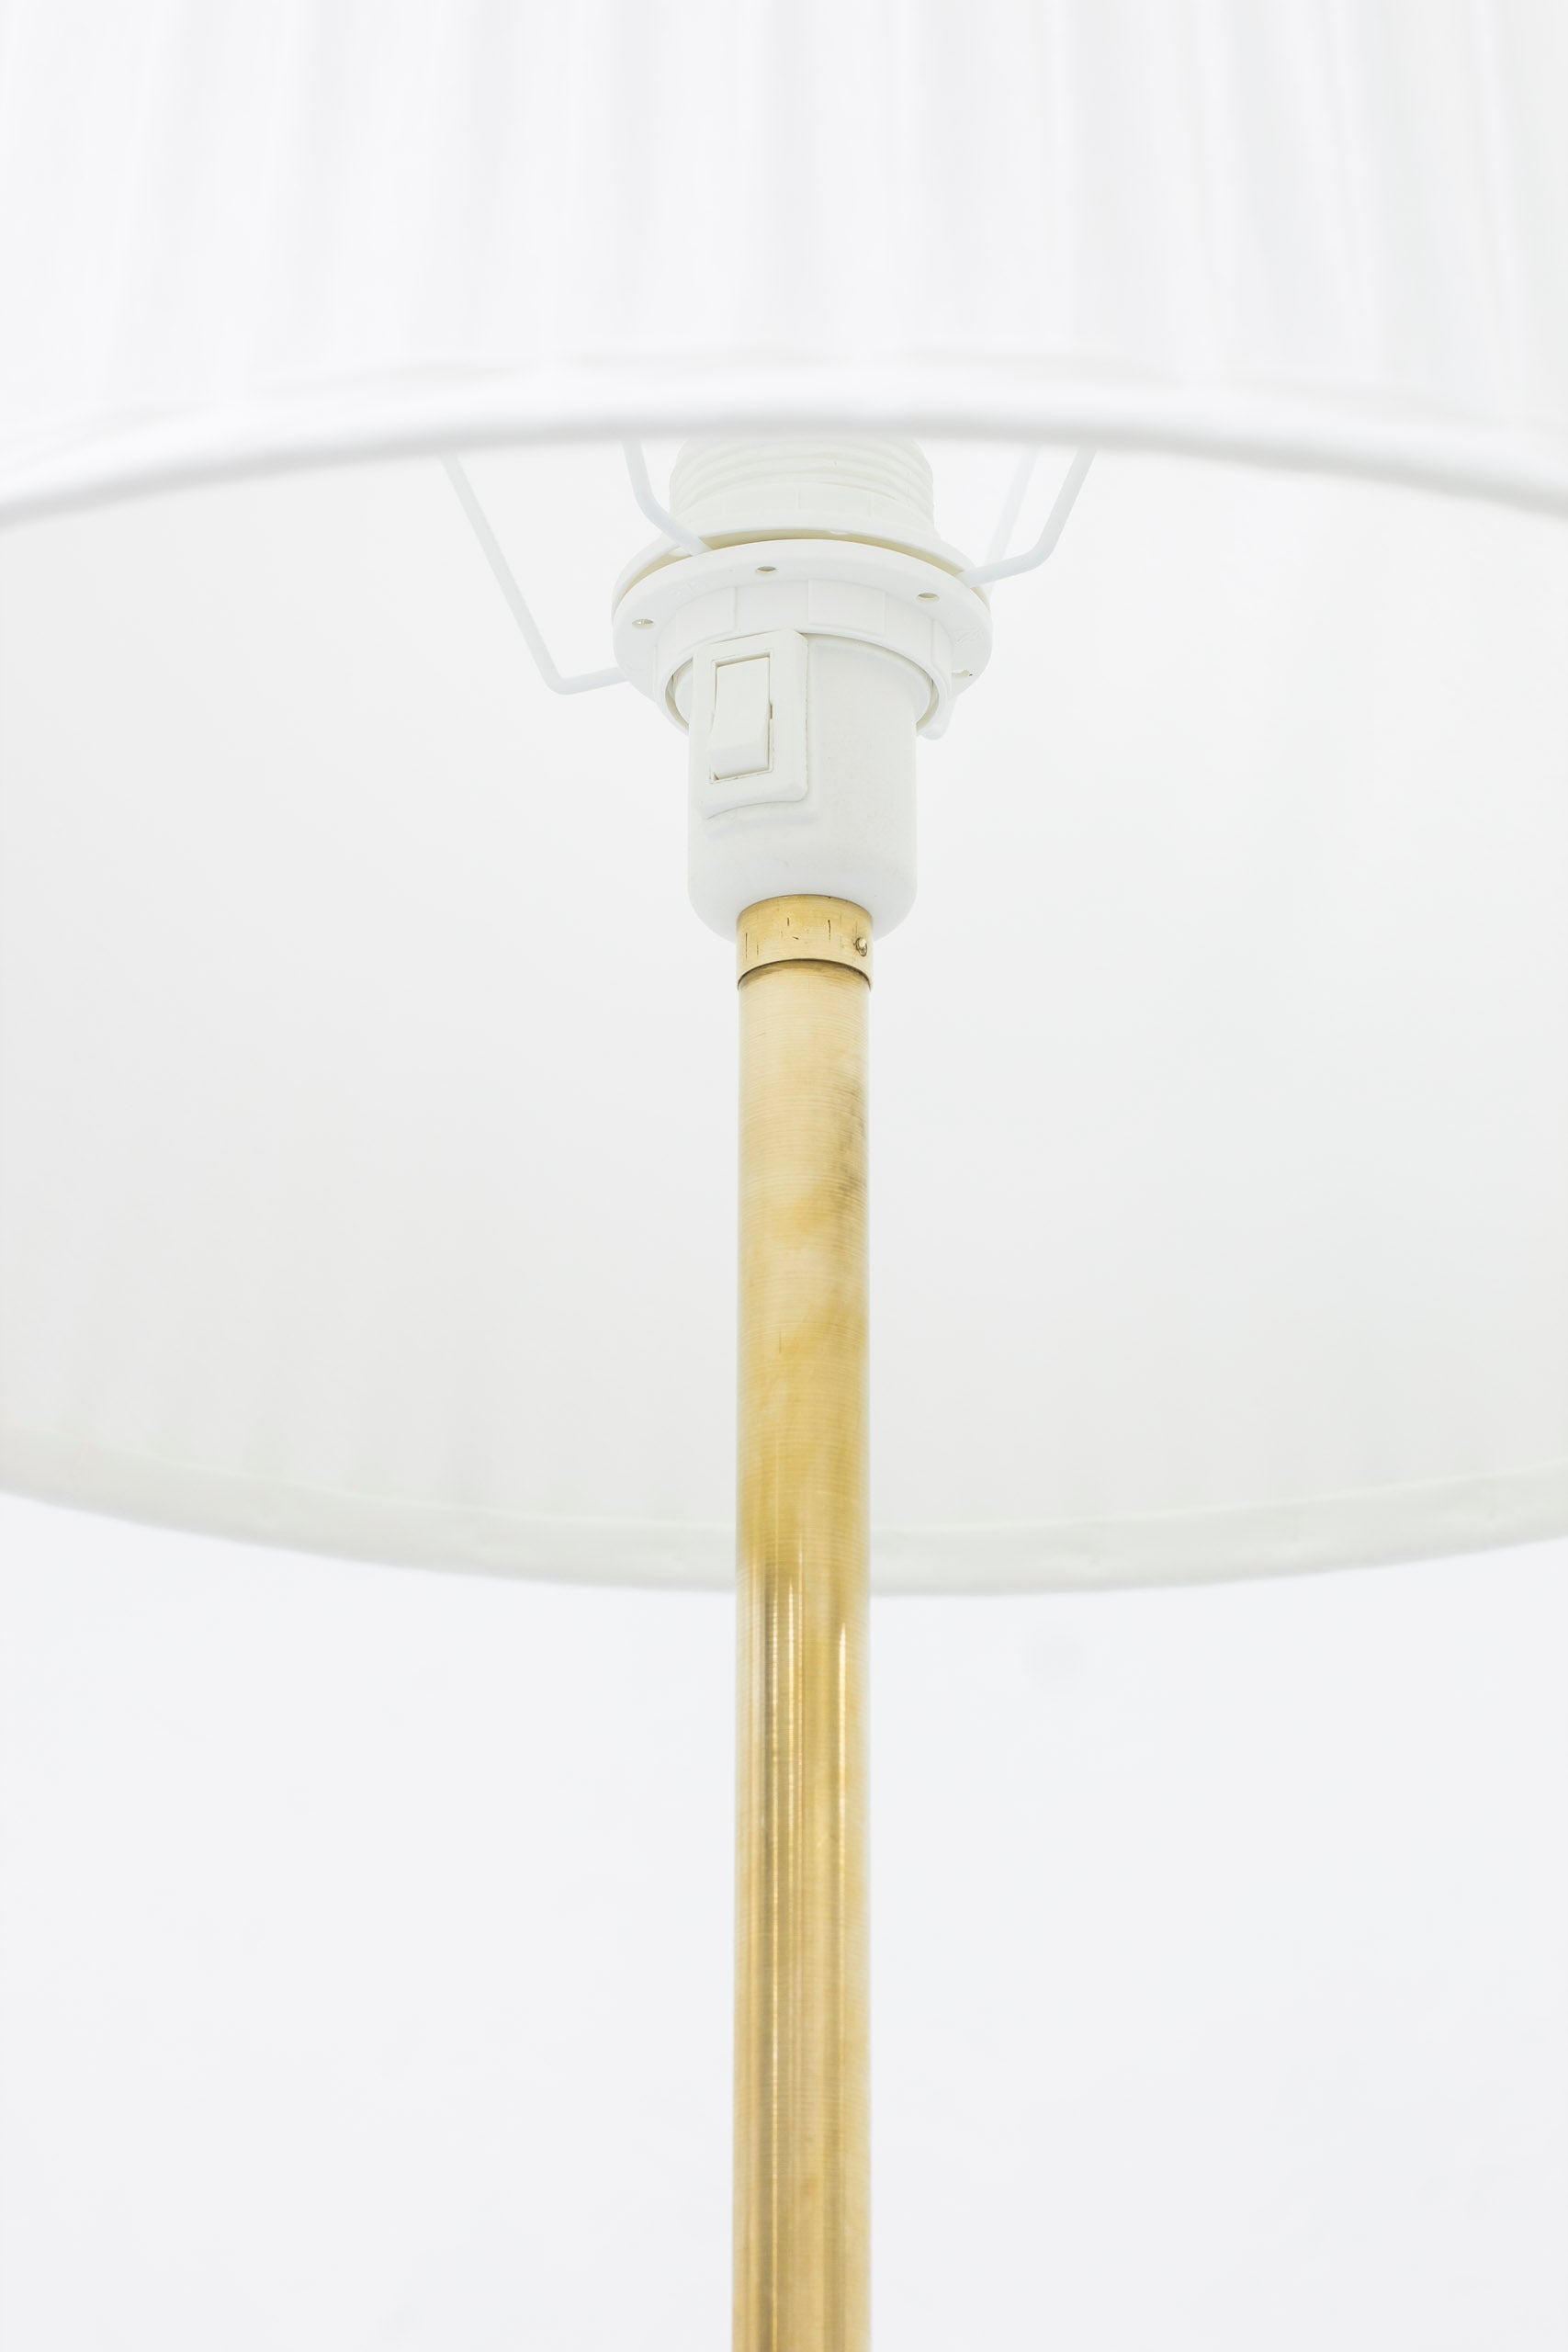 Floor lamp 2605 by Luco